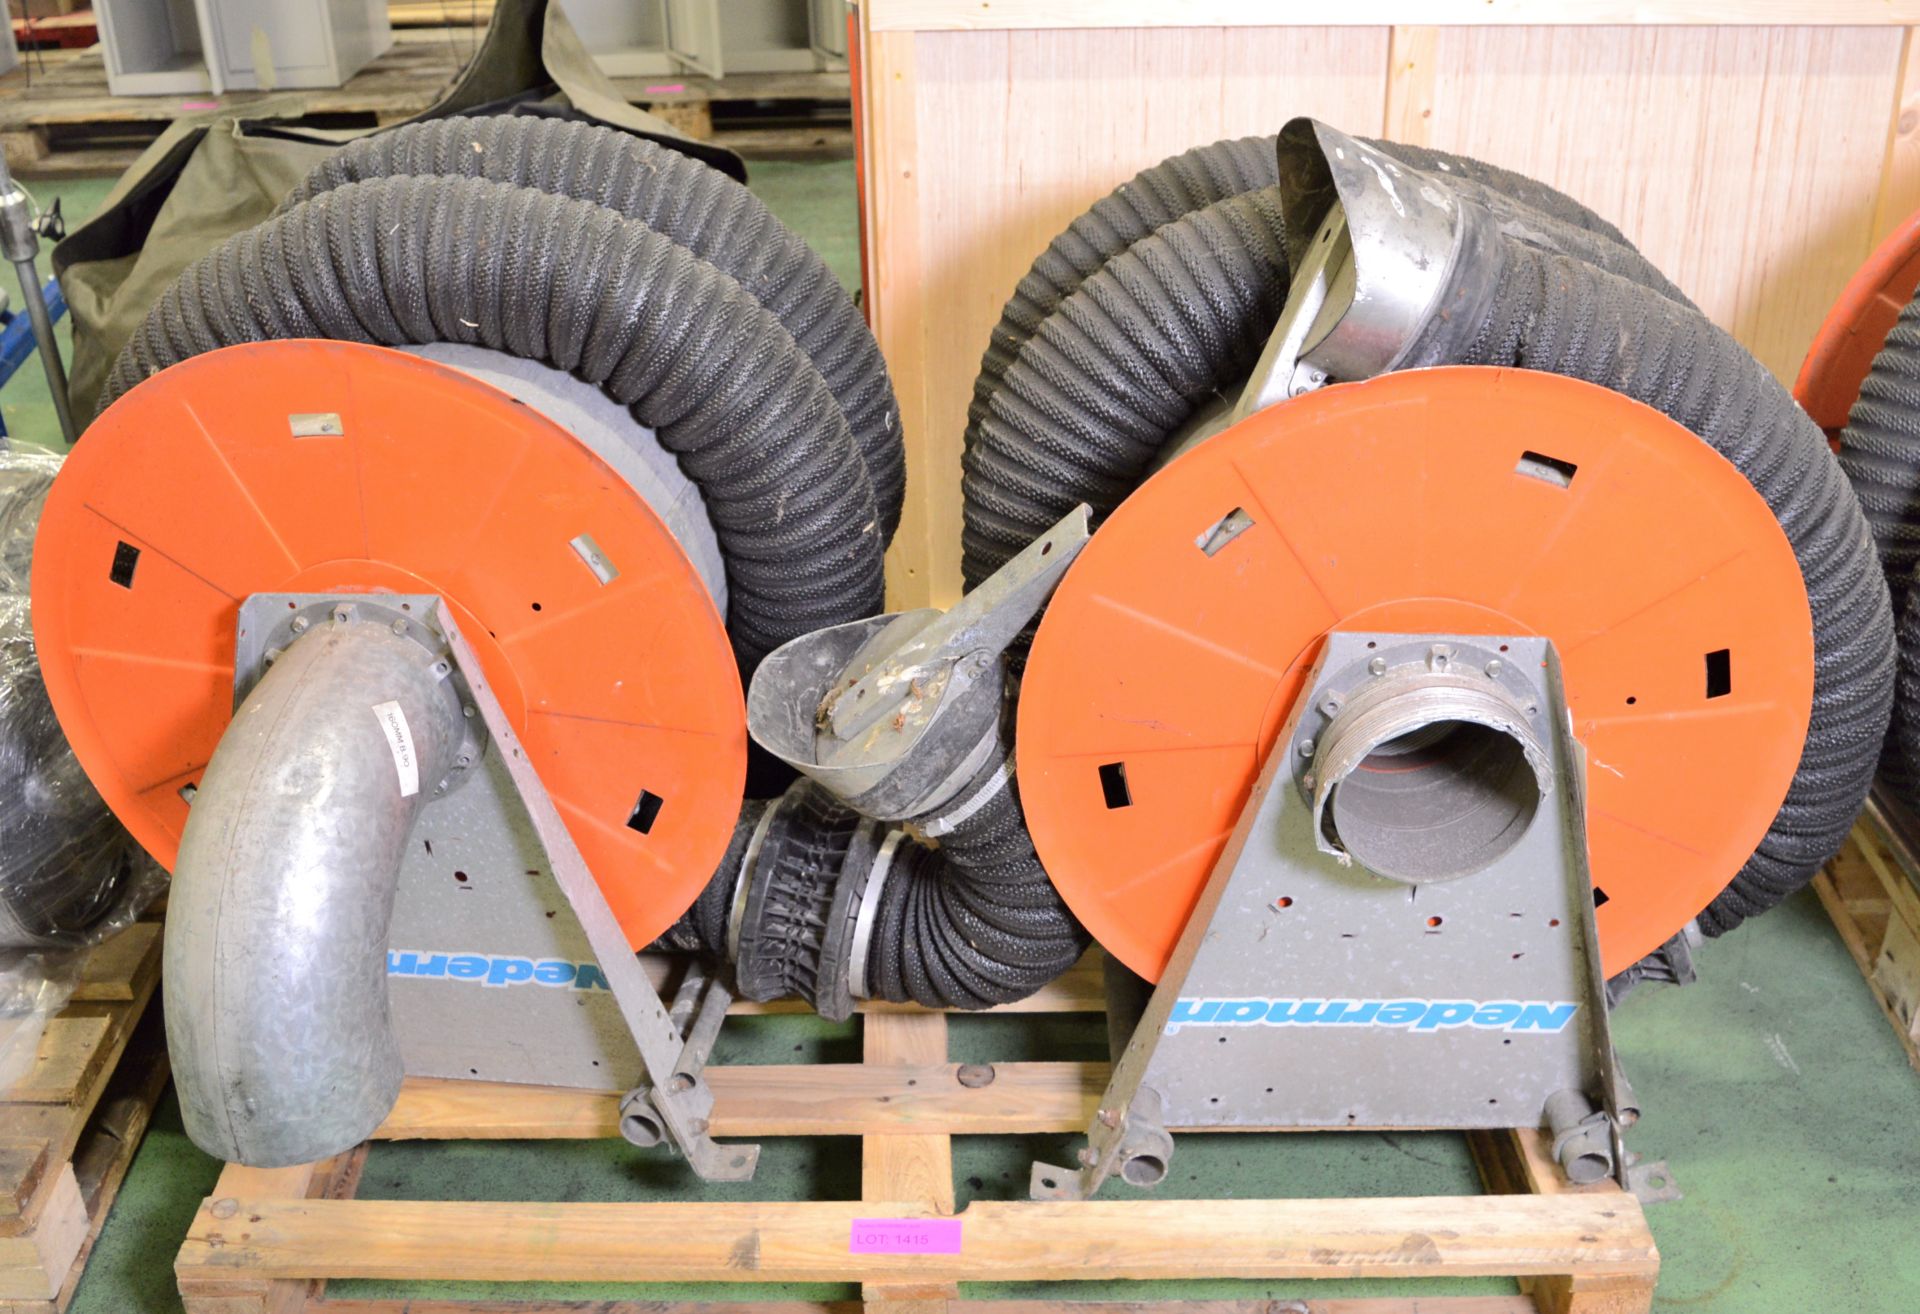 2x Nederman Industrial Equipment Extraction Units.